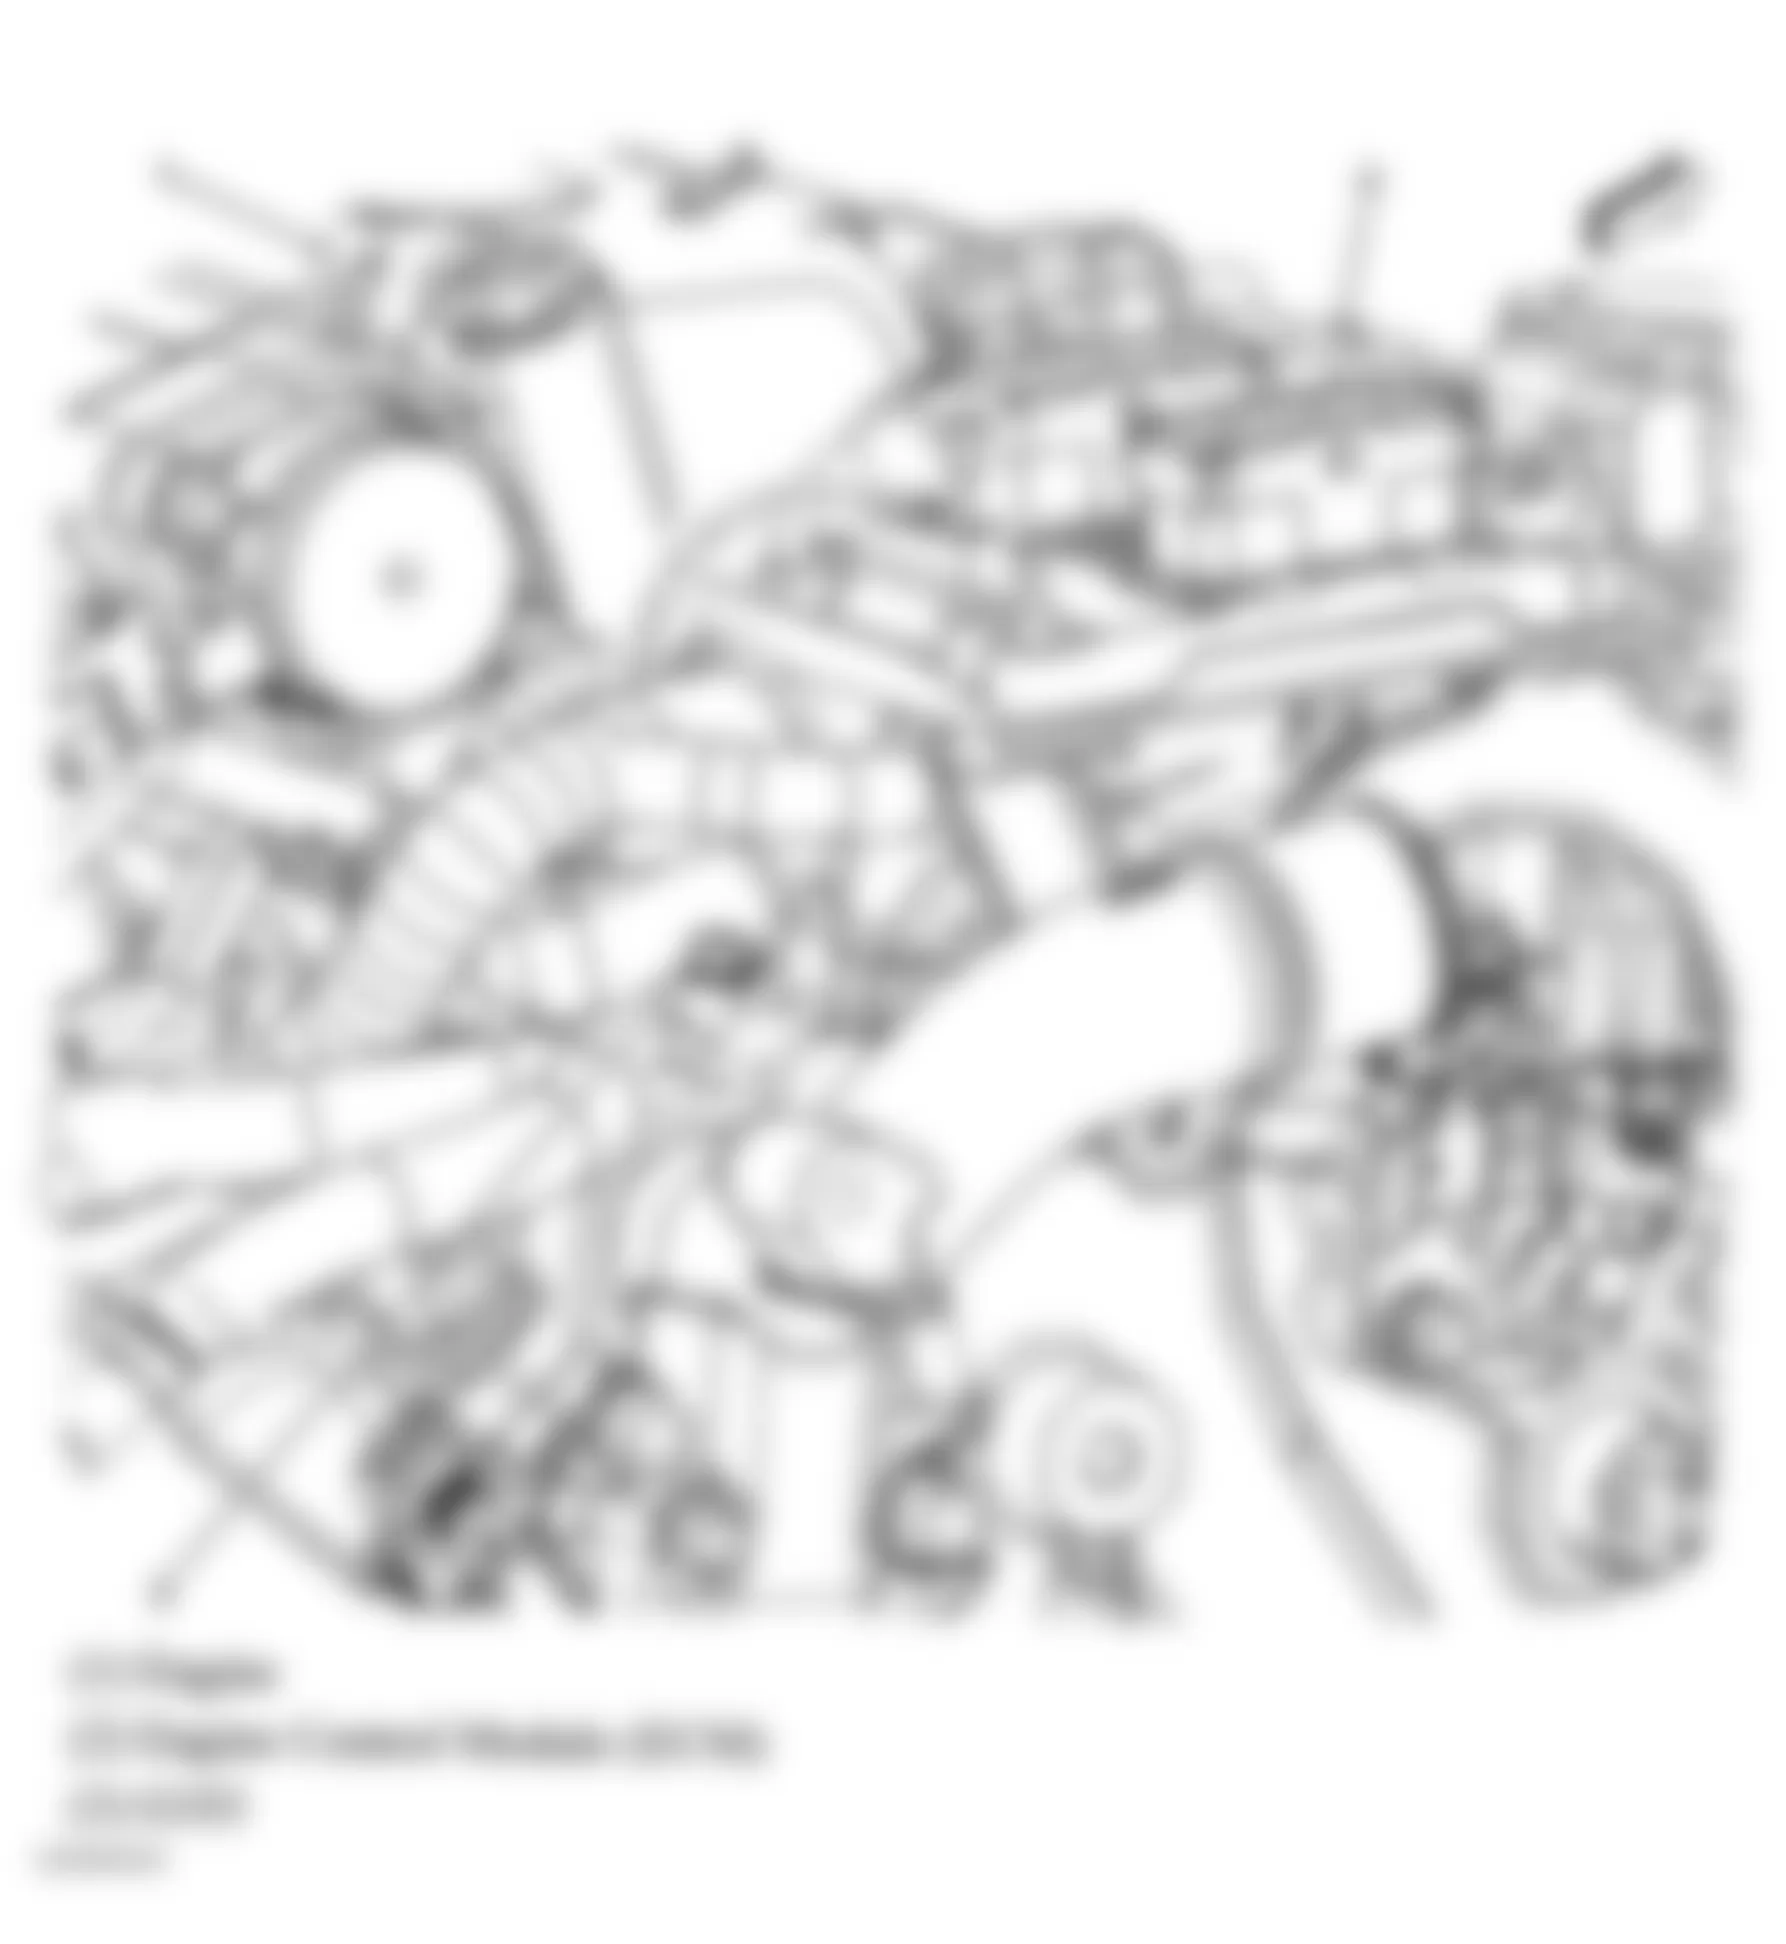 Buick Allure CXL 2008 - Component Locations -  Engine Assembly (3.6L)